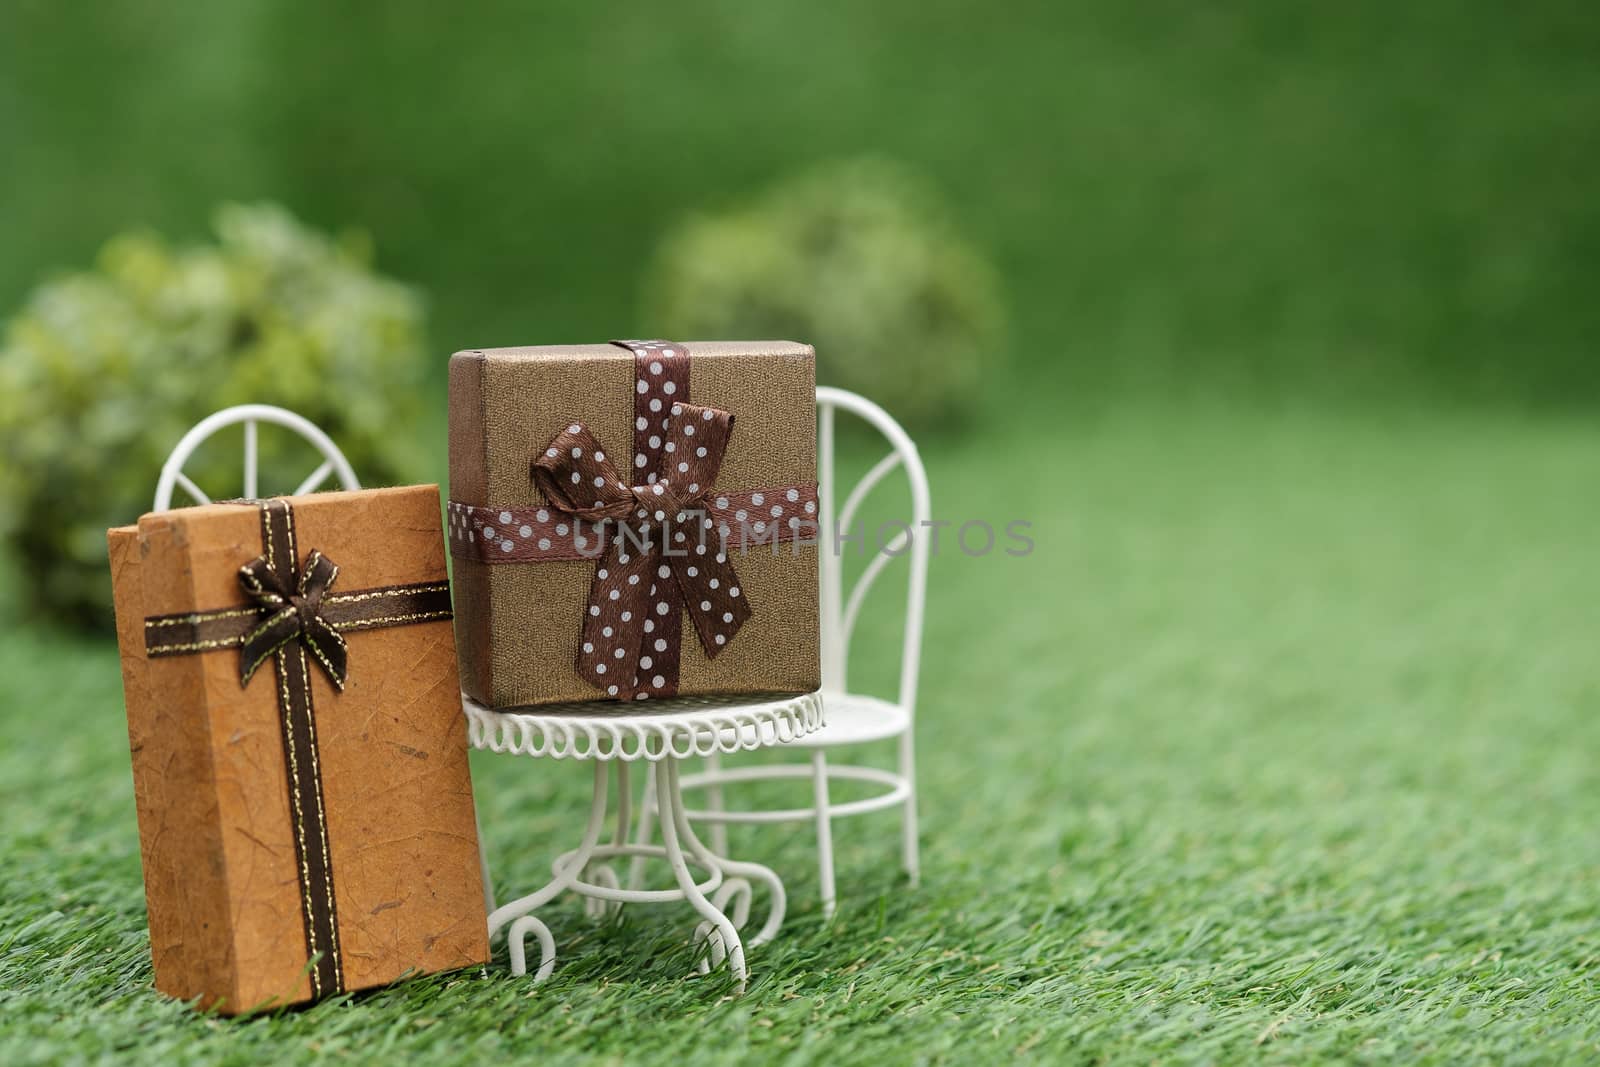 Gift box on white field chair in green garden, with copy space to write.